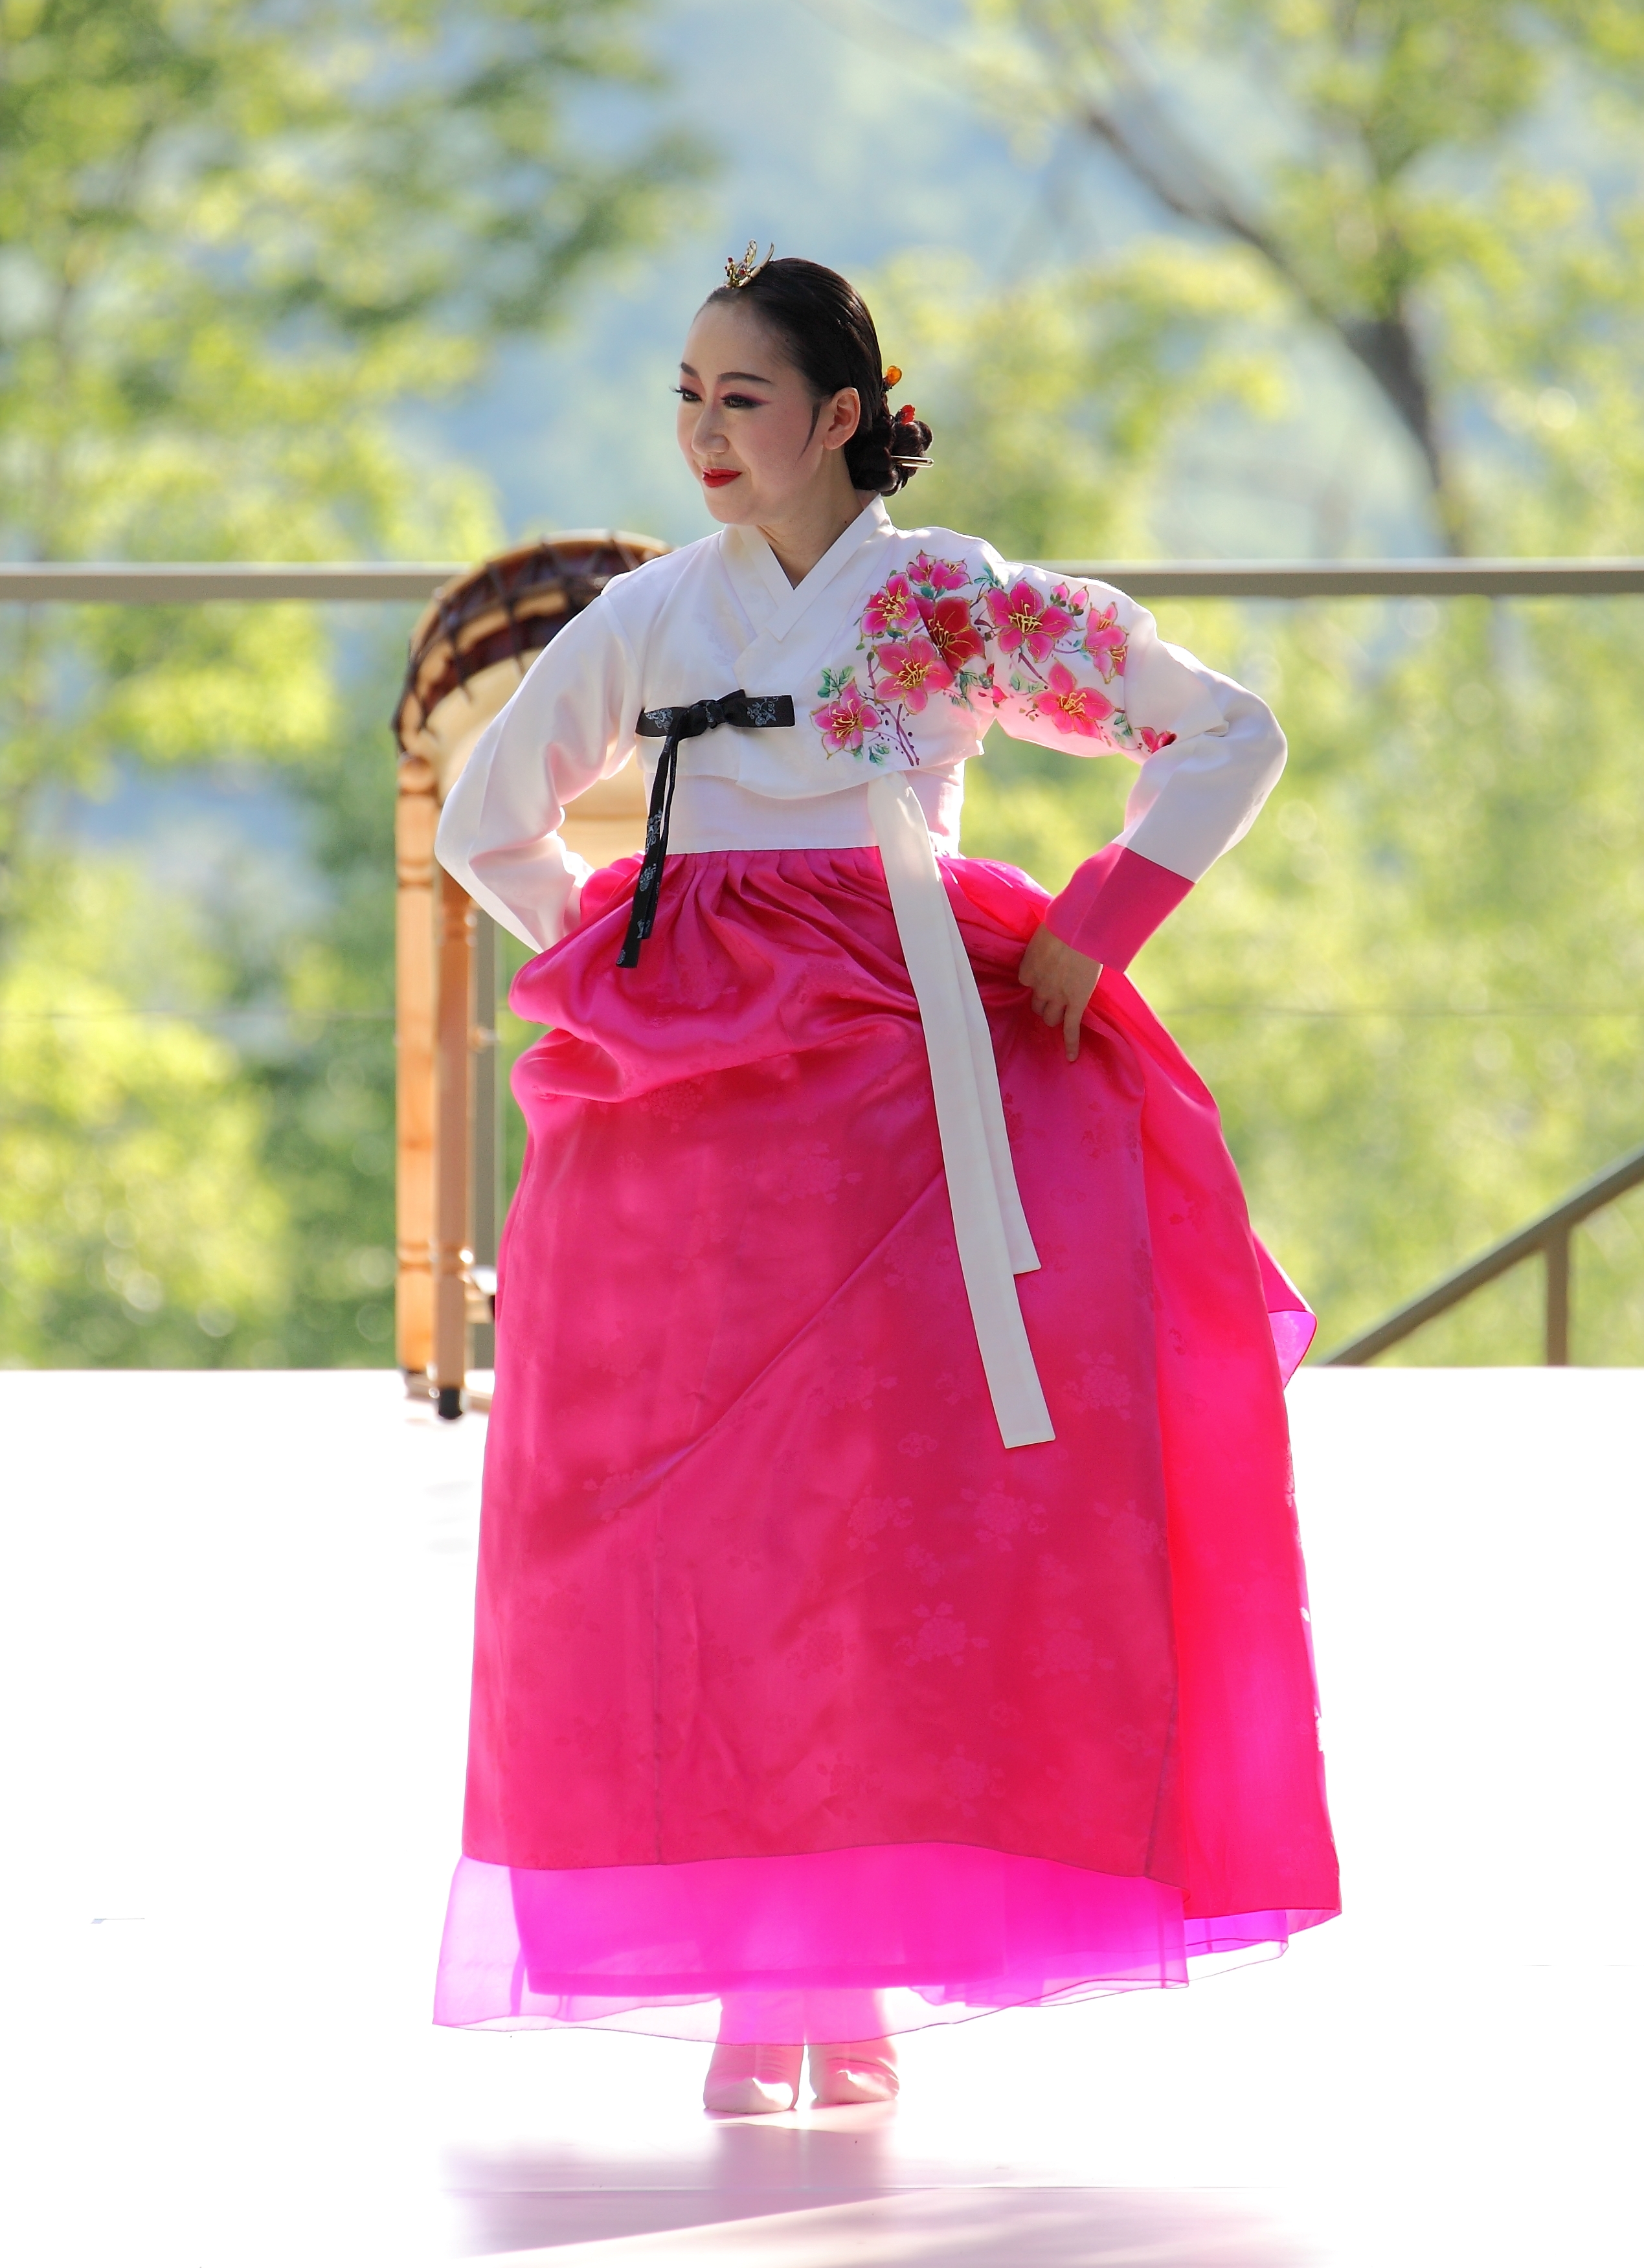 Korean Traditional Music and Dance Center